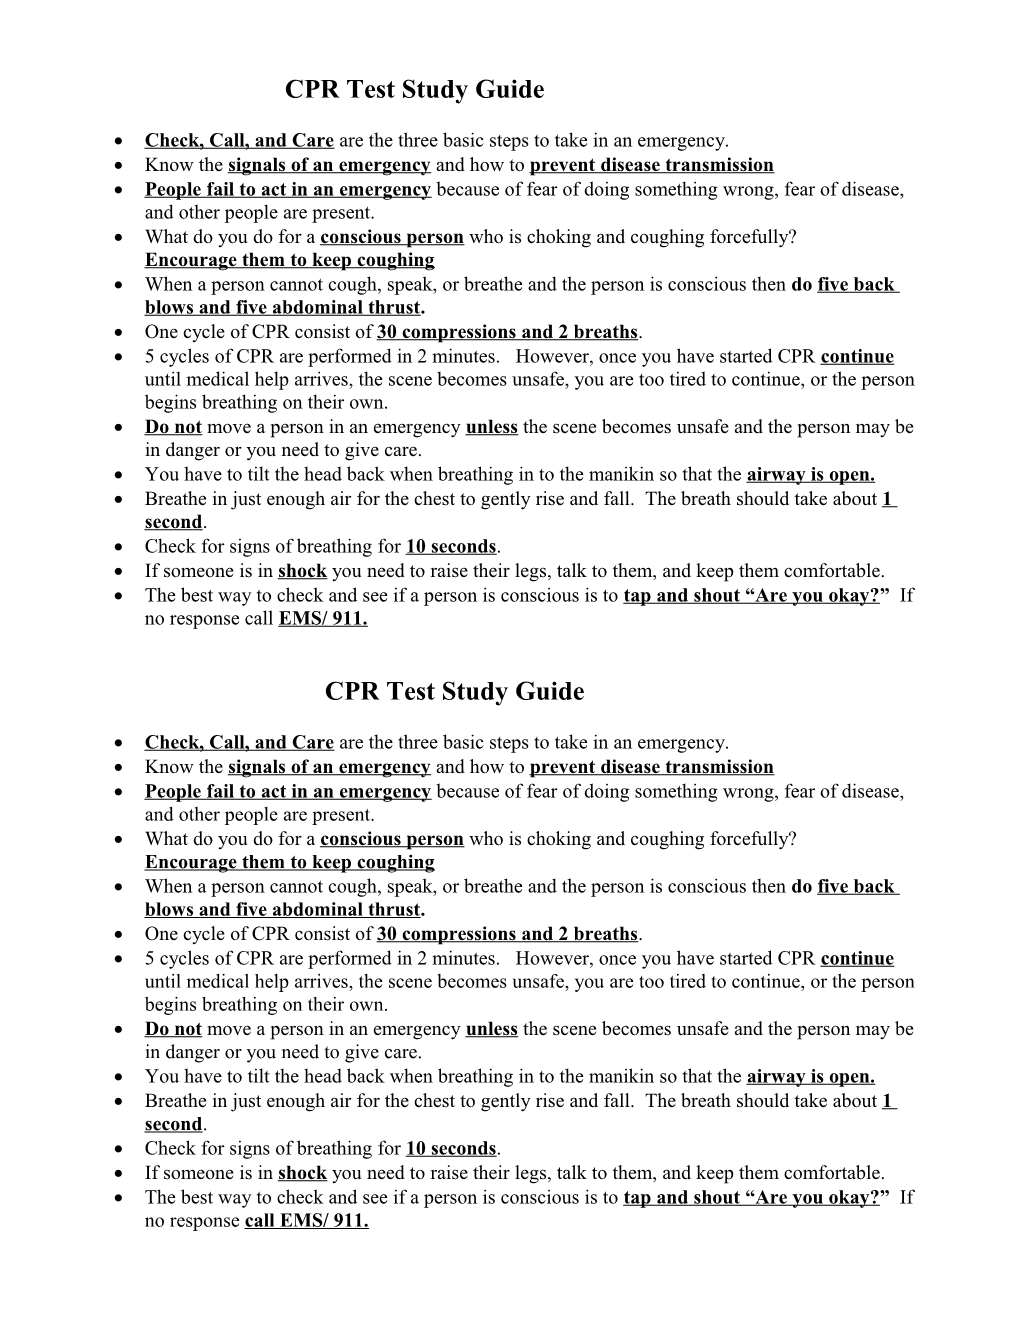 CPR Test Study Guide